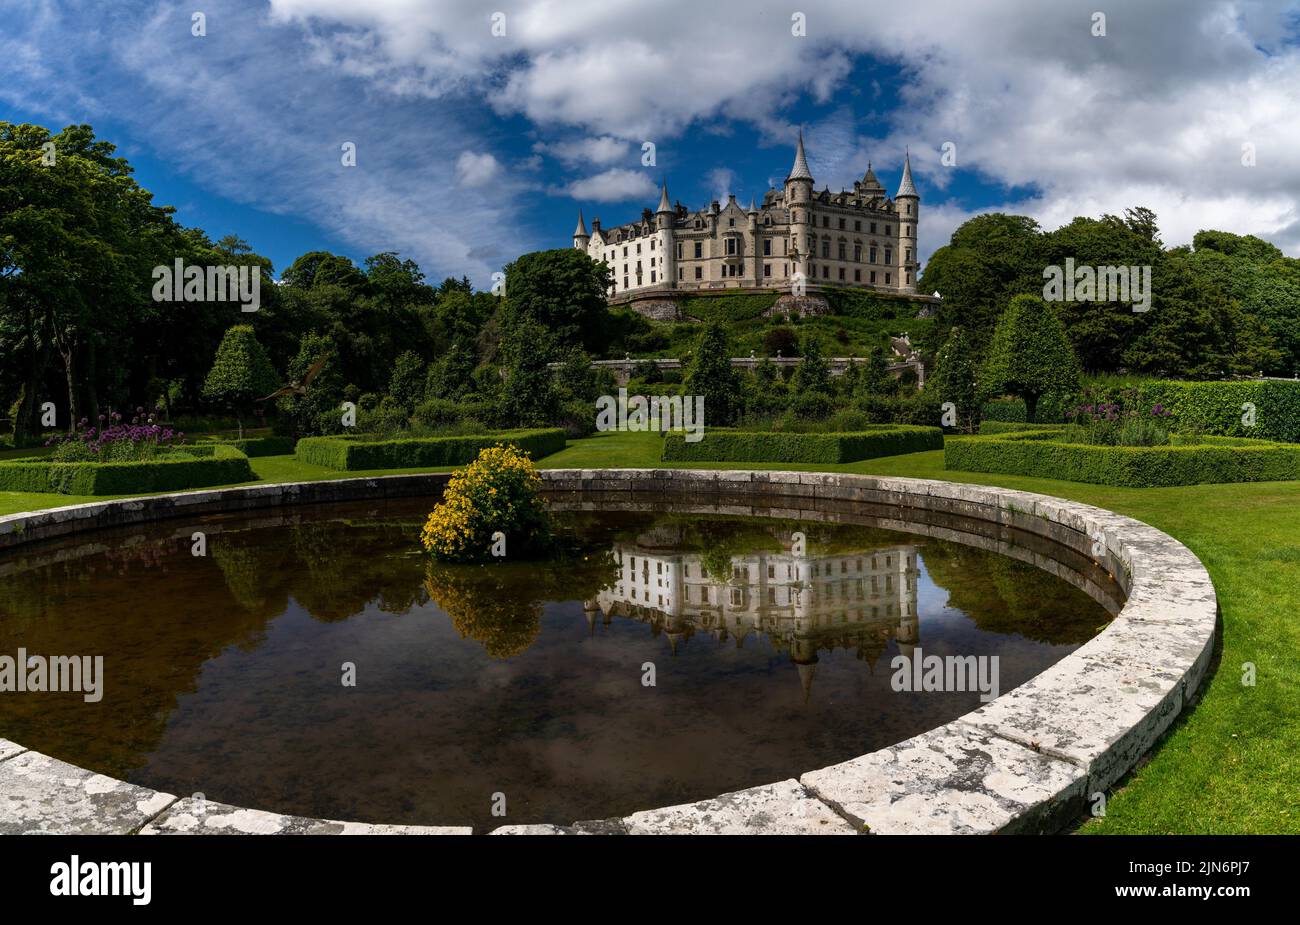 Golspie, United Kingdom - 25 June, 2022: view of Dunrobin Castle and Gardens in the Scottish Highlands and castle reflection in the fountain Stock Photo